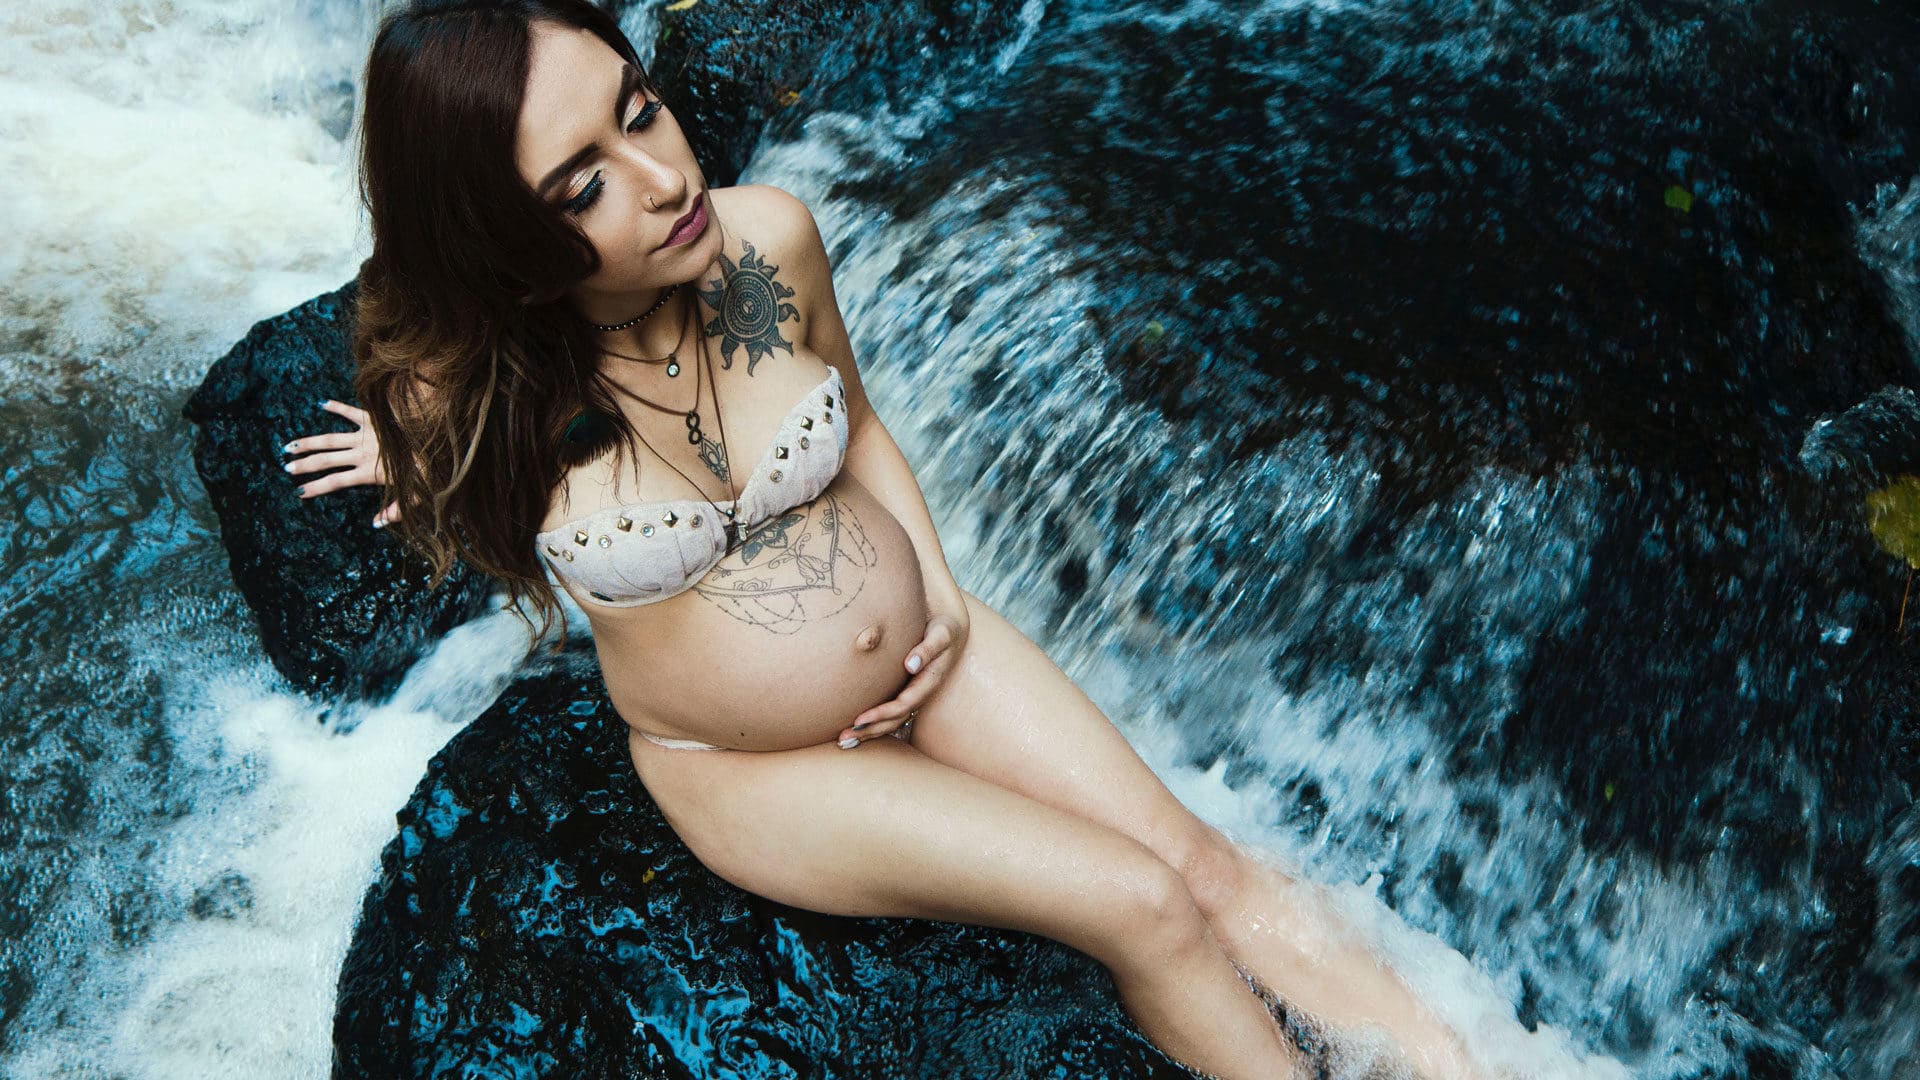 A pregnant individual poses elegantly on dark wet rocks with rushing water surrounding them, capturing a moment of calmness and connection with nature, embodying the witchy spirit of motherhood.